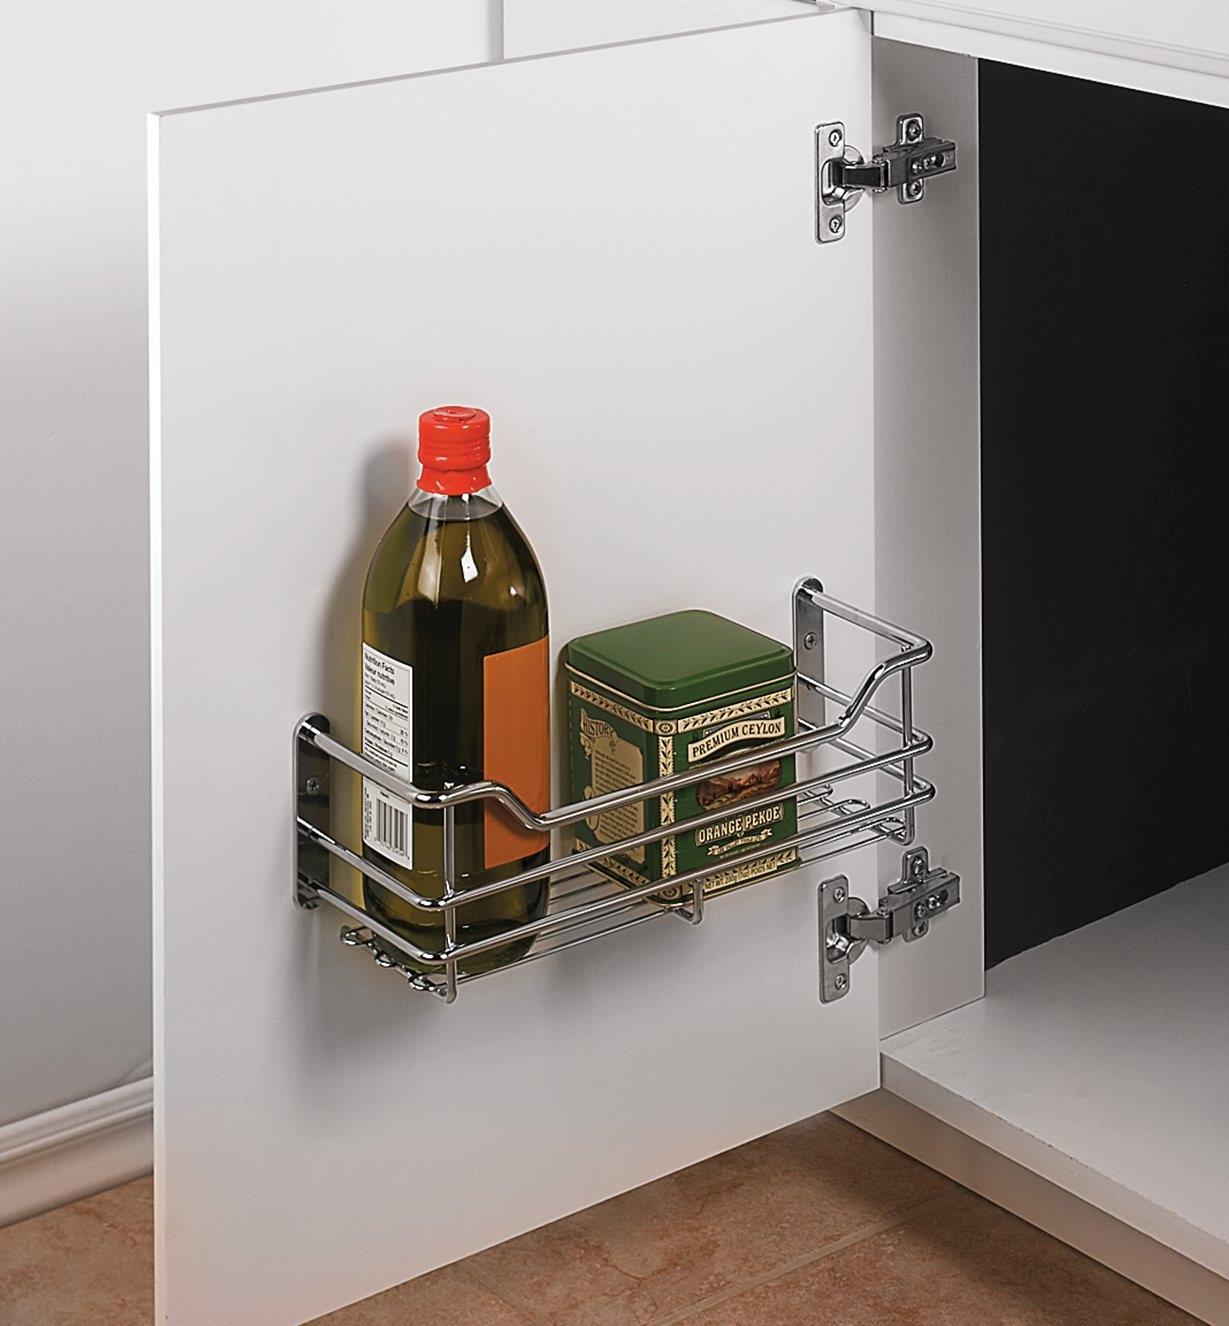 Utility Basket mounted inside a cupboard door, holding tea and cooking oil